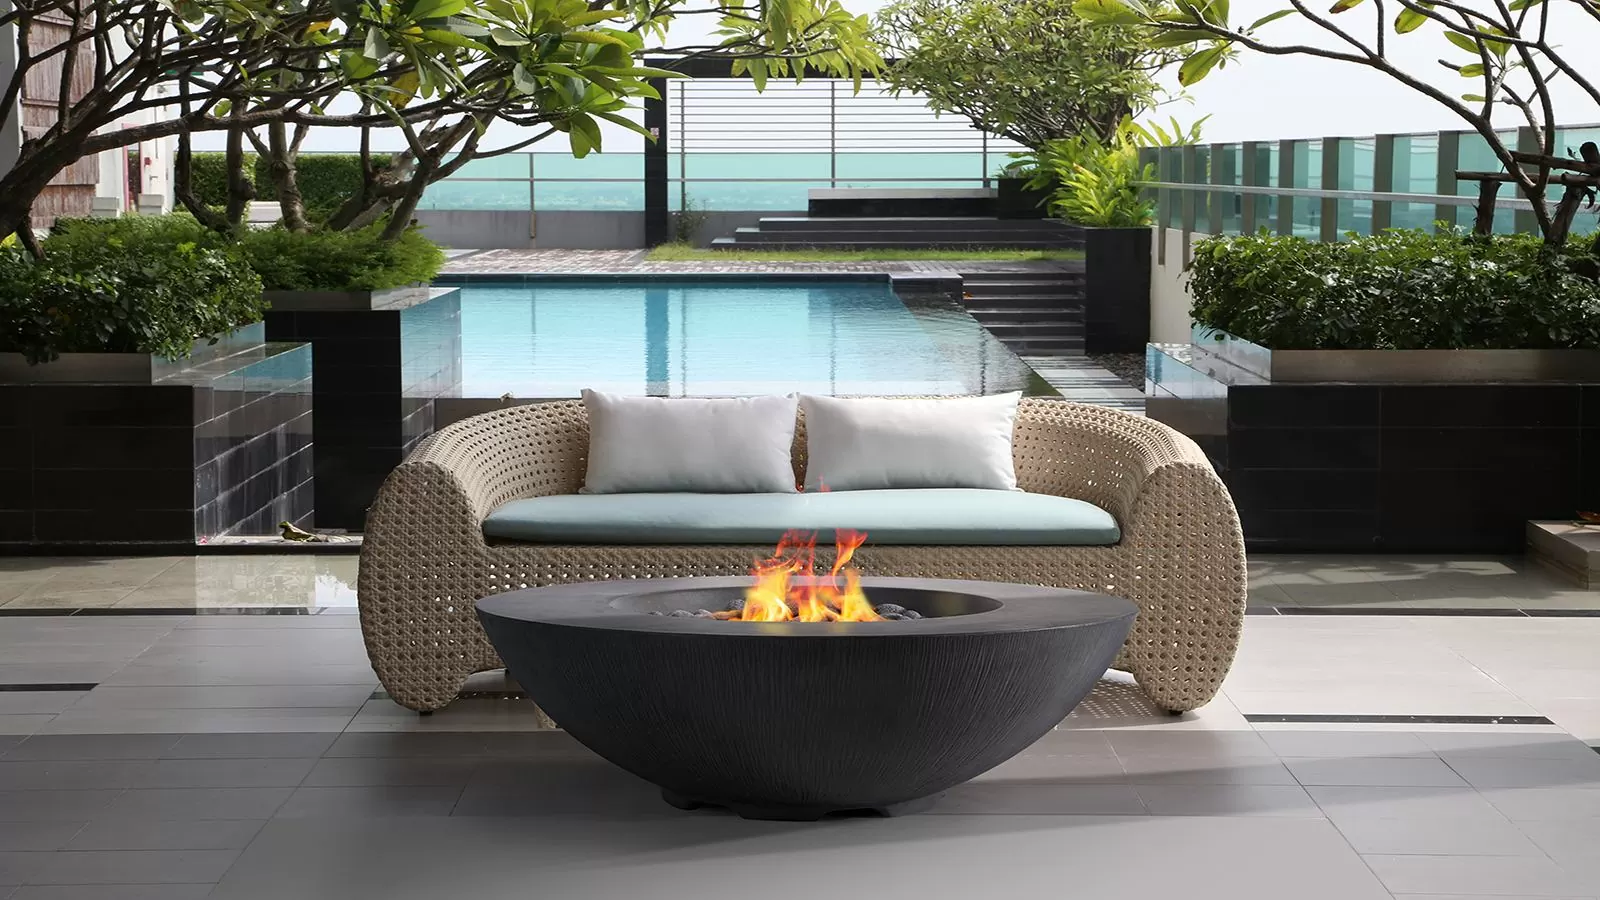 The Shangri La firepit by Pyromania is a great addition to any relaxing poolside.